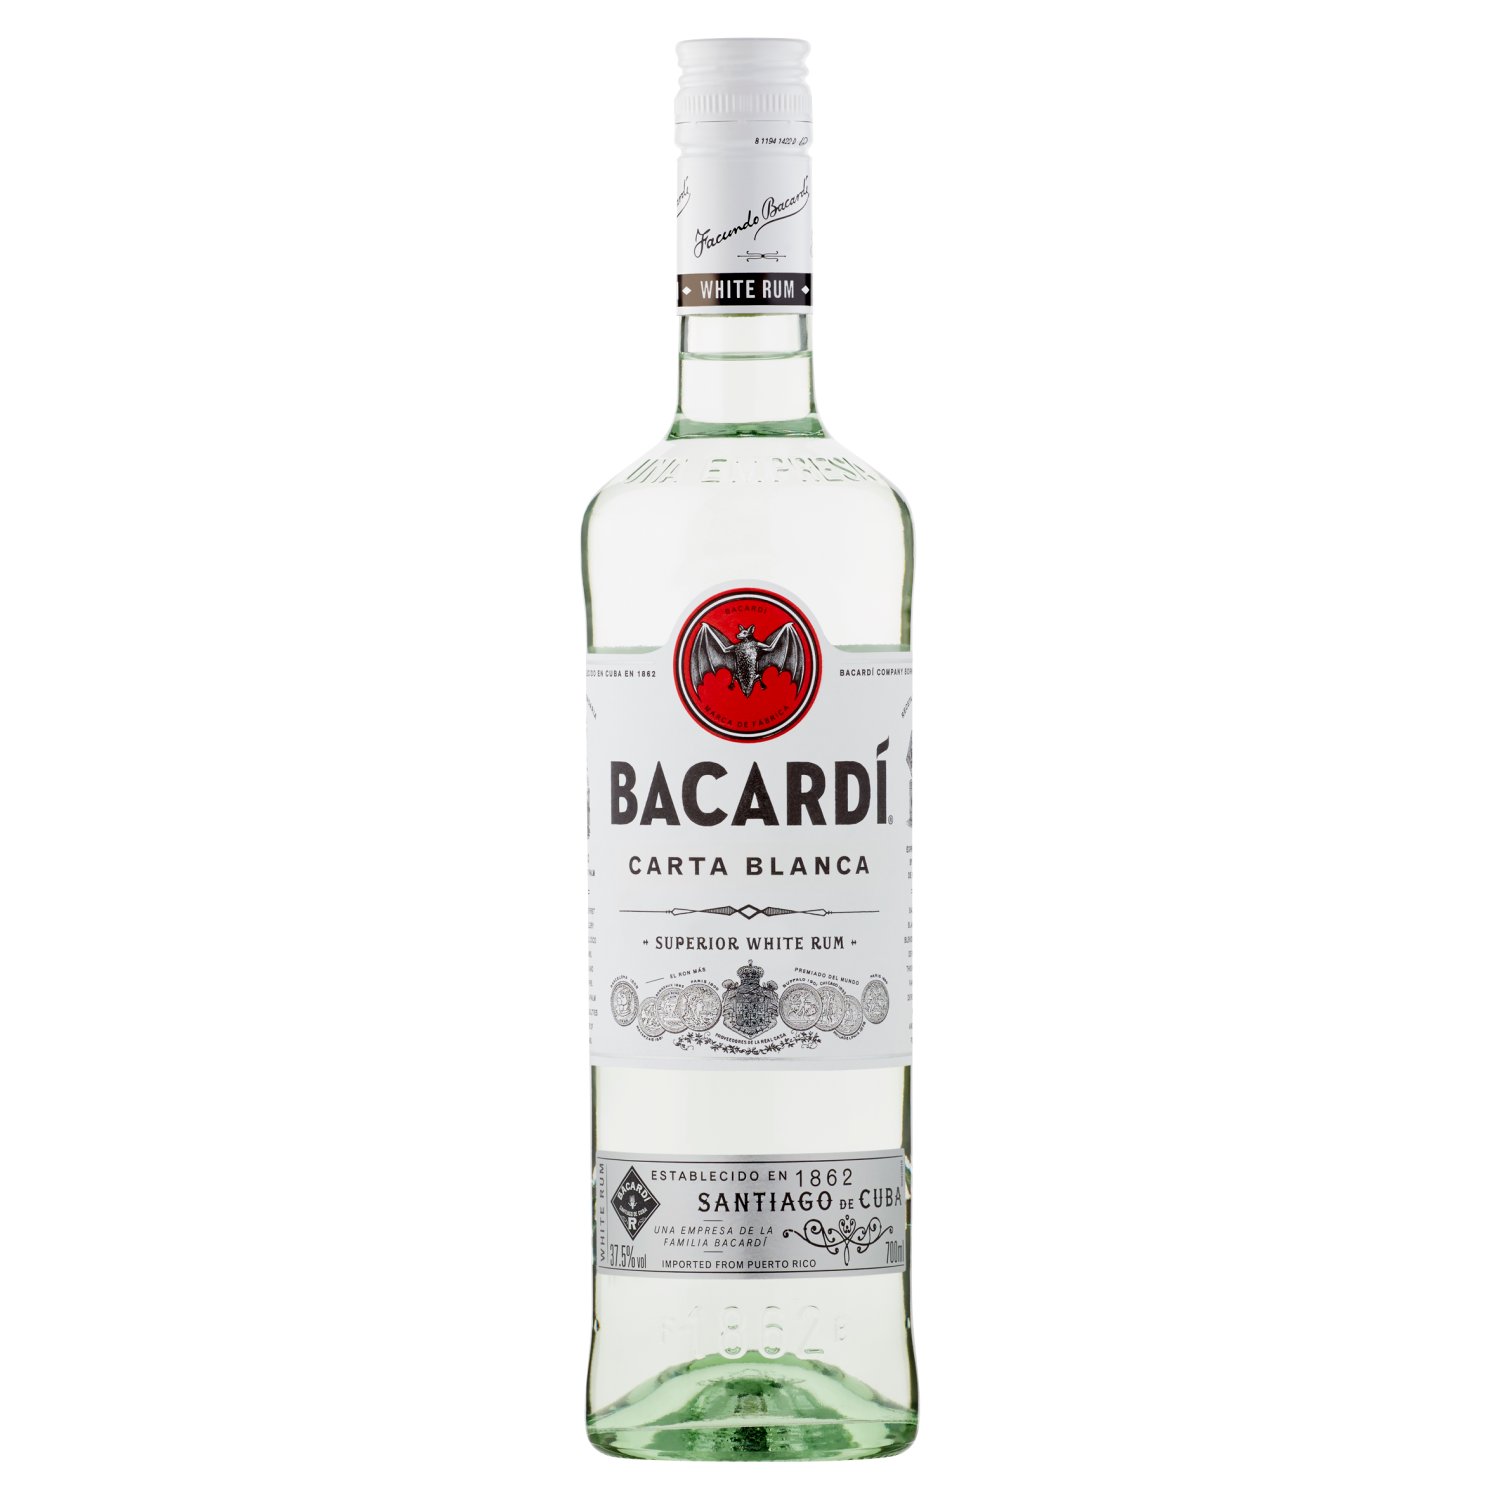 Expertly crafted by Maestros De Ron Bacardí
Bacardí has been blended by Maestros De Ron Bacardí. This rum has light vanilla notes, developed in oak barrels, and is perfect for mixing.

Perfect for mixing
Bacardí Carta Blanca is a light tasting and aromatic white rum with delicate floral and fruity notes, ideal for mixing. As this neither dominates nor disappears, it mixes well with all sodas and fresh juices, as well as your favorite cola.